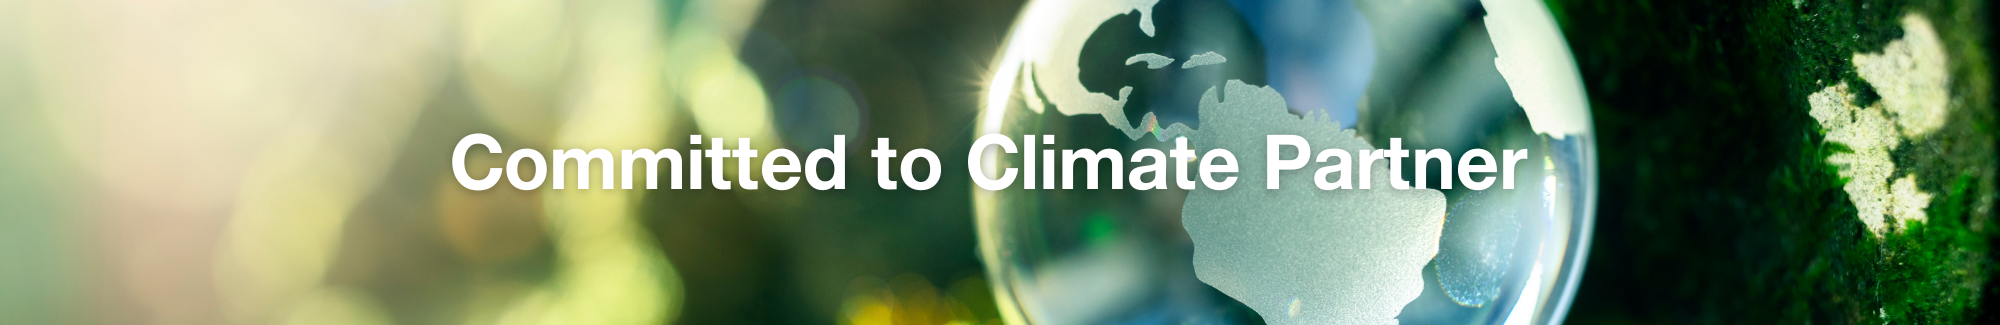 We're commited to Climate Partner | WRS